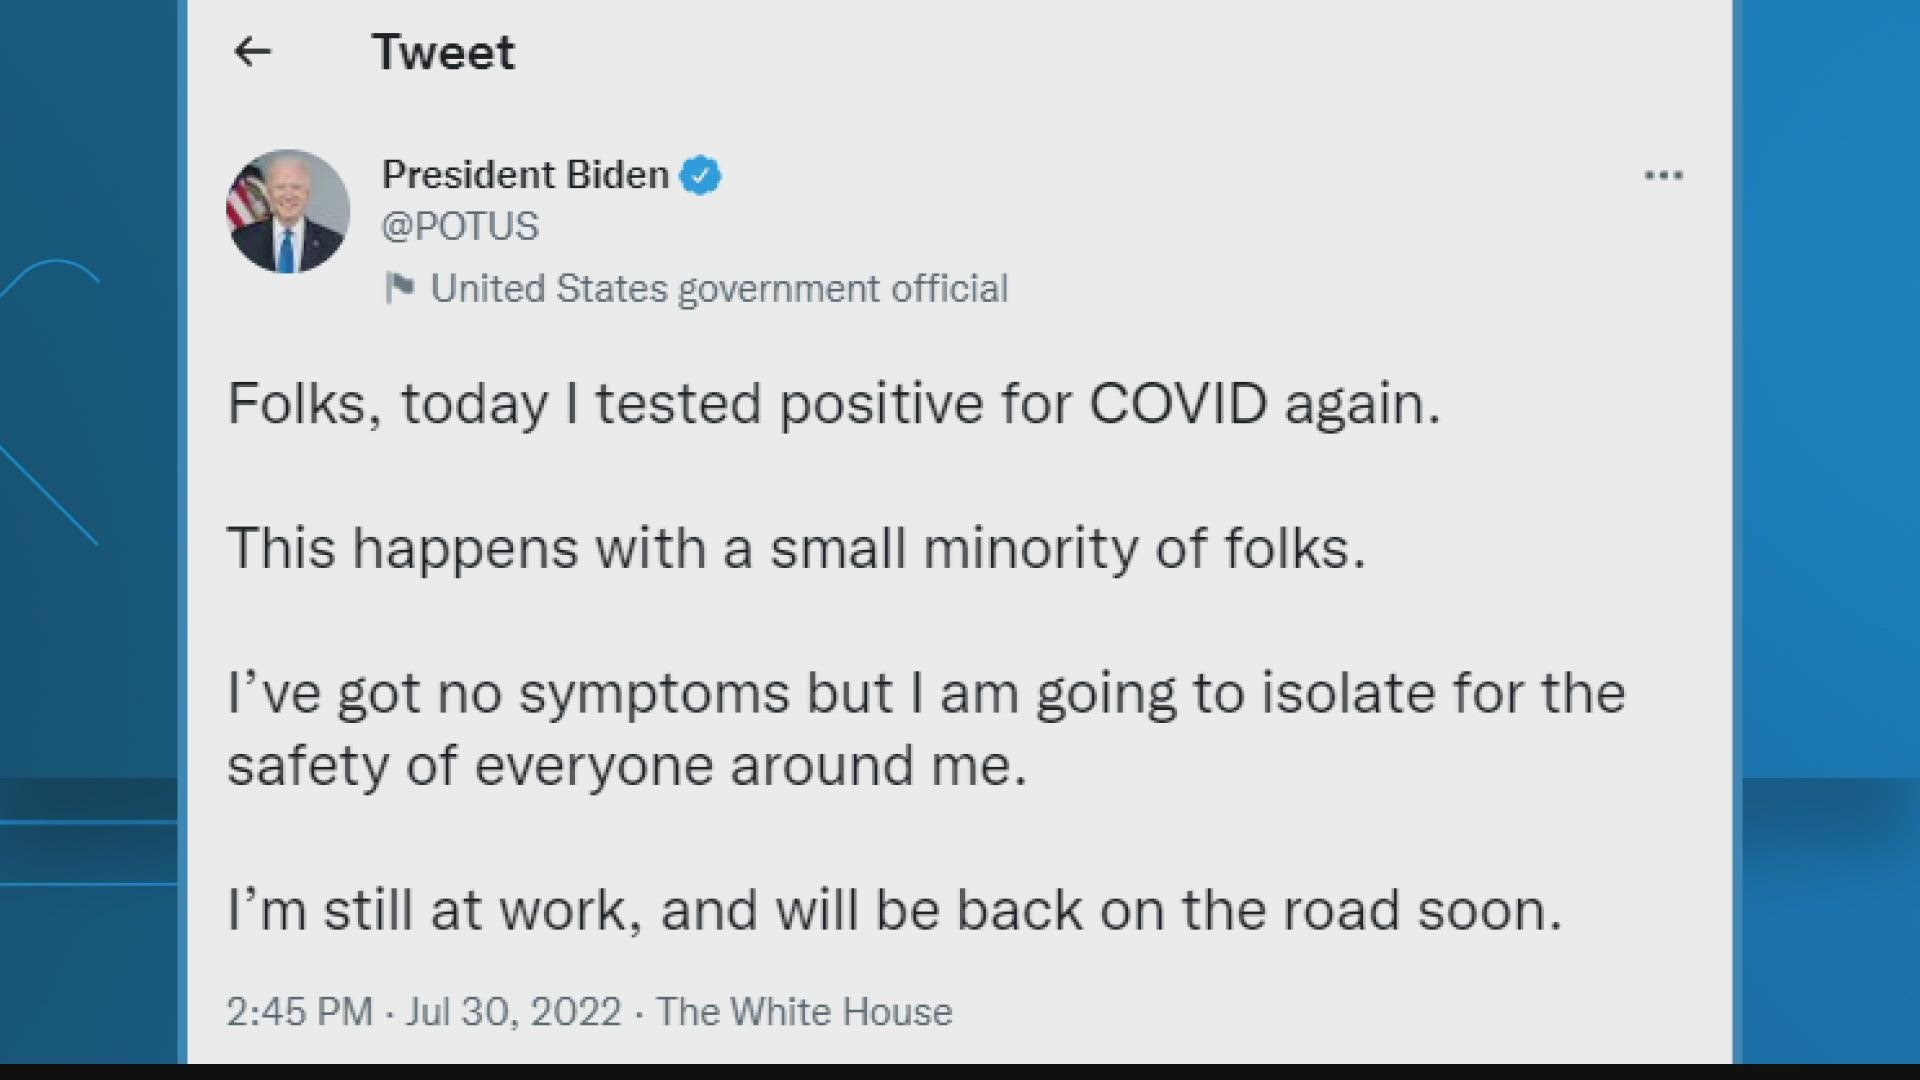 Biden says he is isolating for the safety of those around him, though he is not experiencing symptoms.